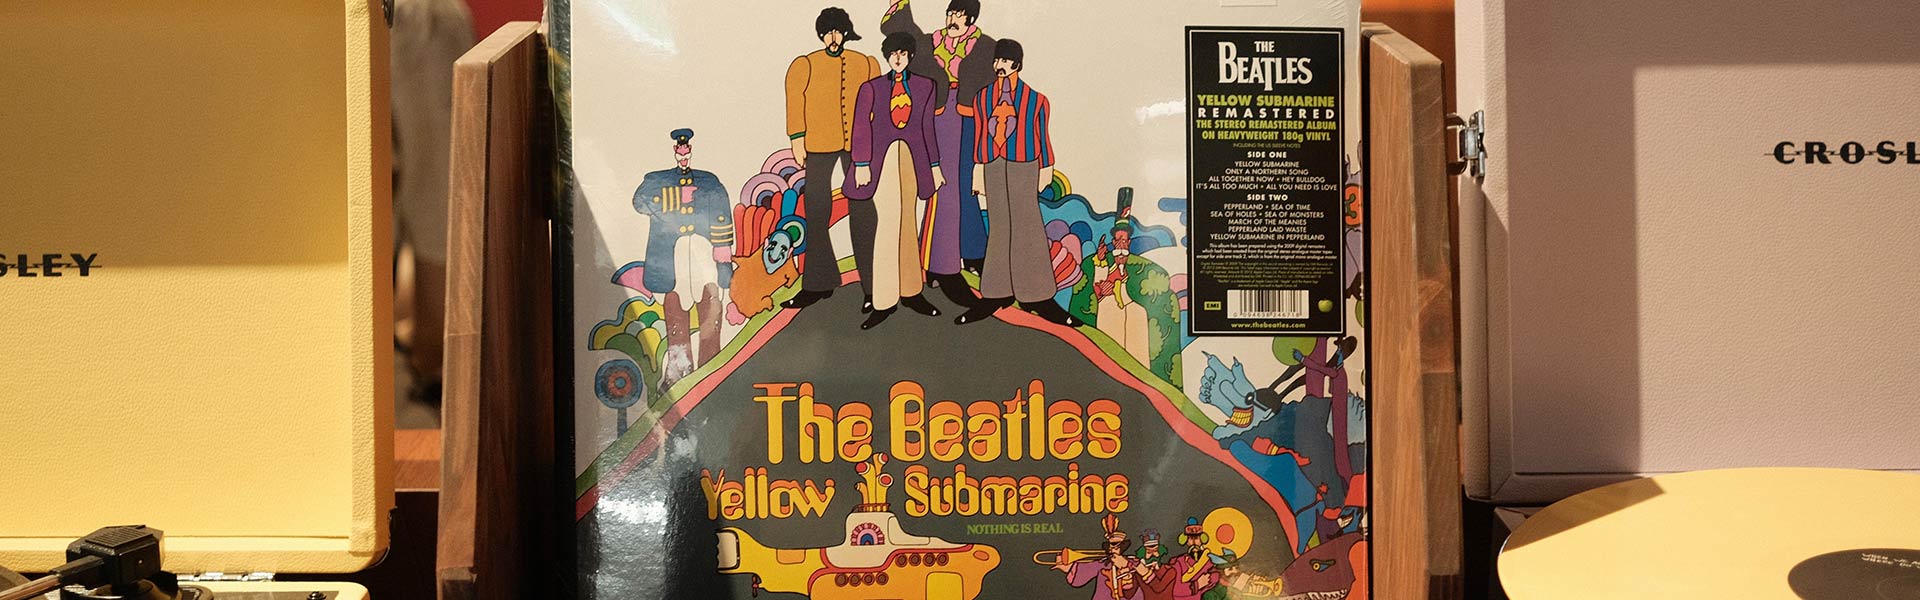 The Beatles CD cover